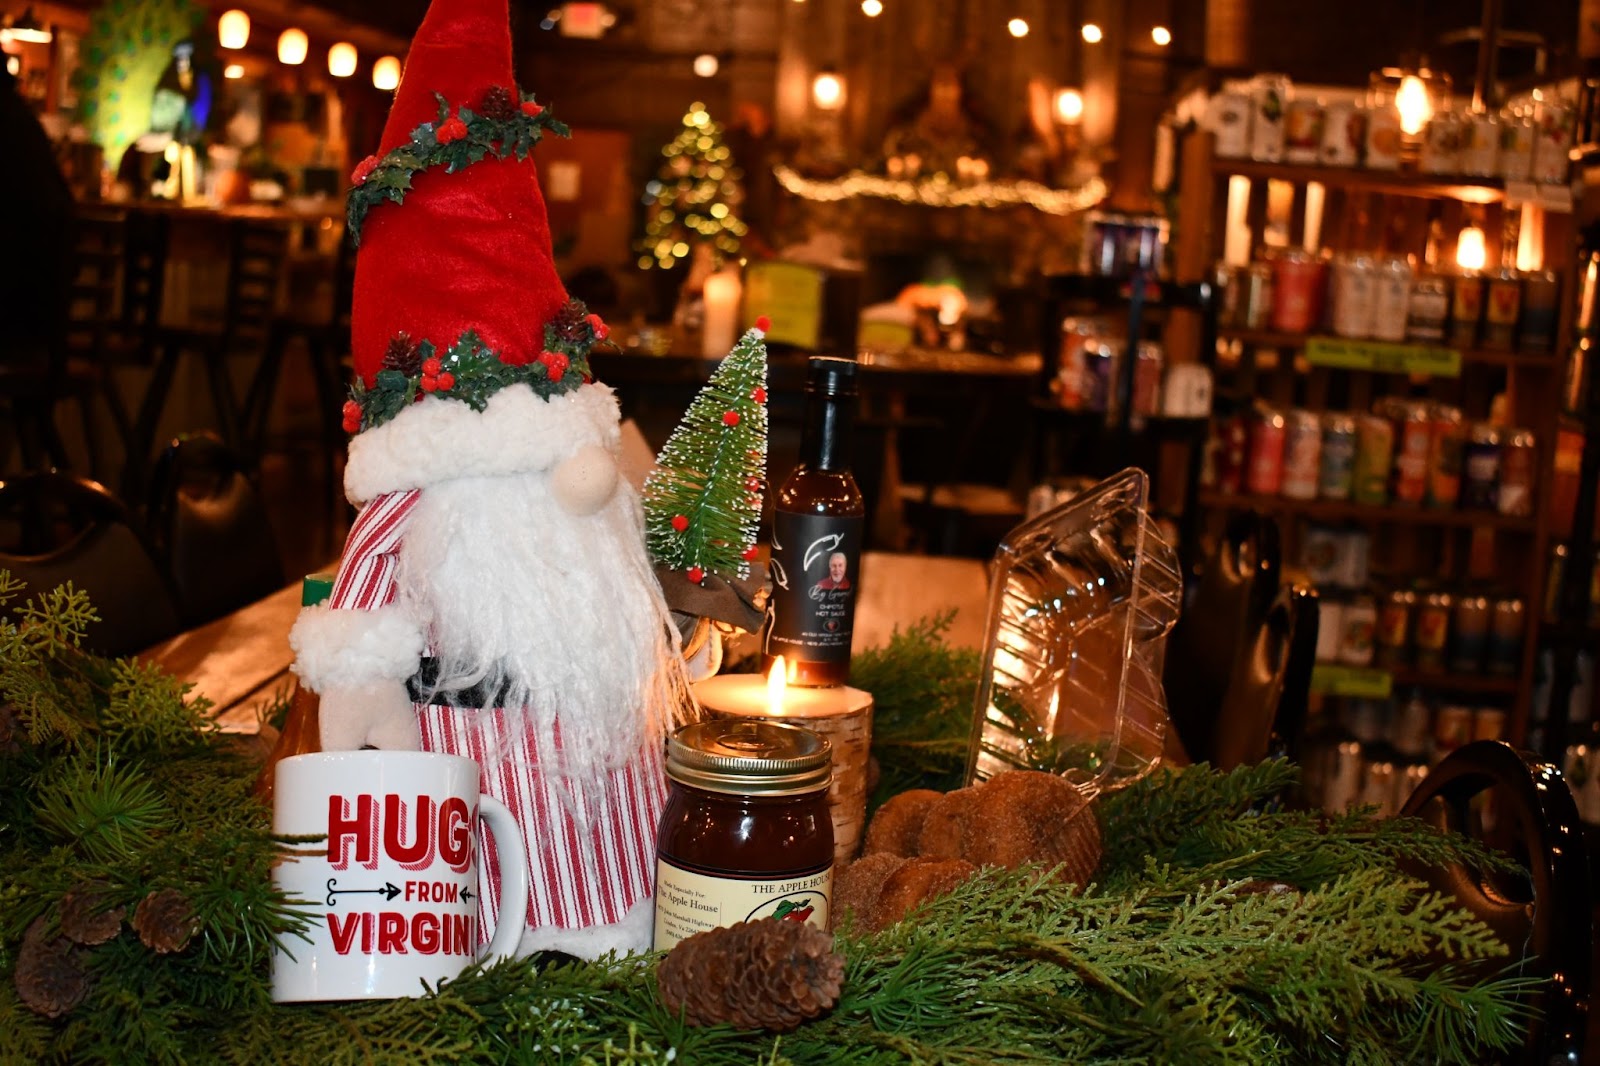 Savor The Flavors Of The Shenandoah Valley Festive Food And Beverage Delights For The Holidays